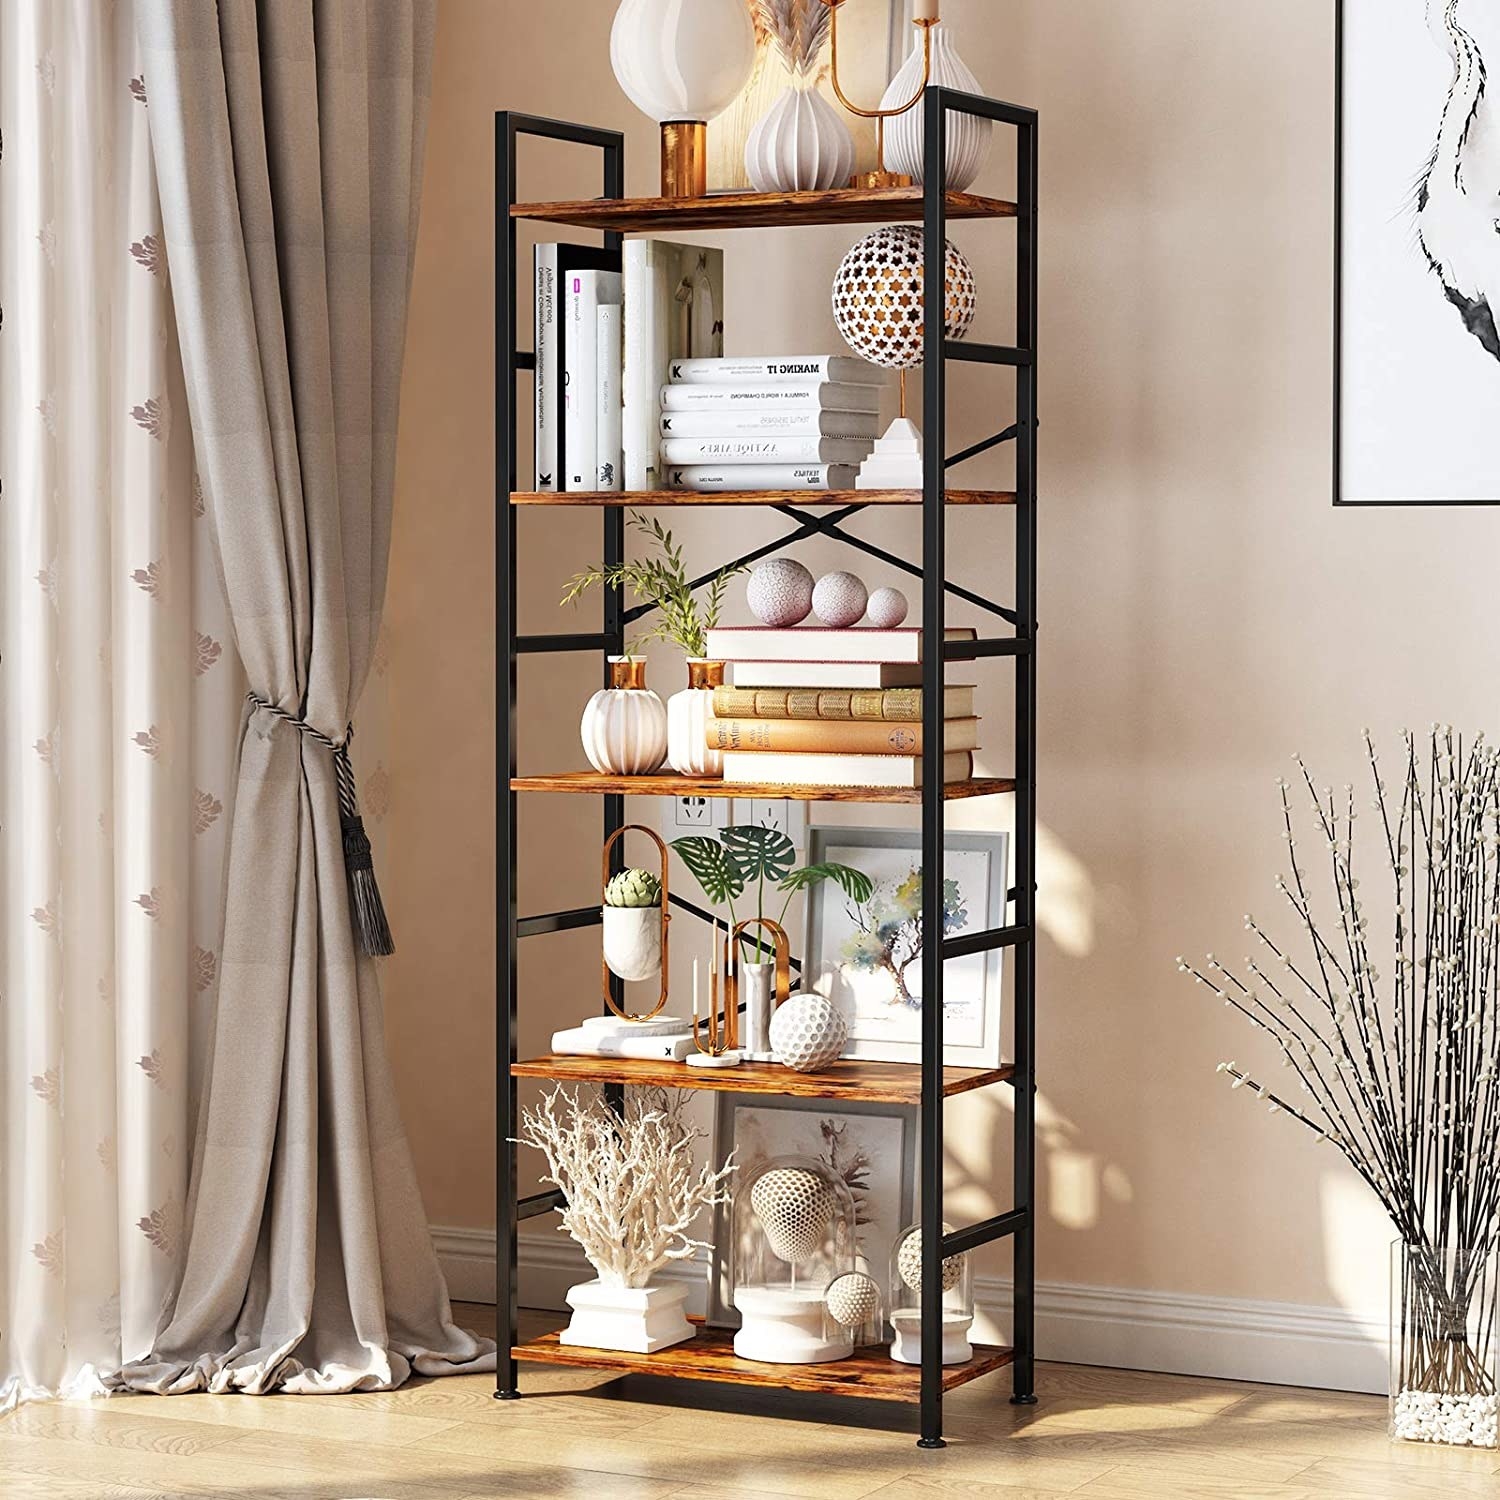 The five-tier tall bookcase in brown wood and metal